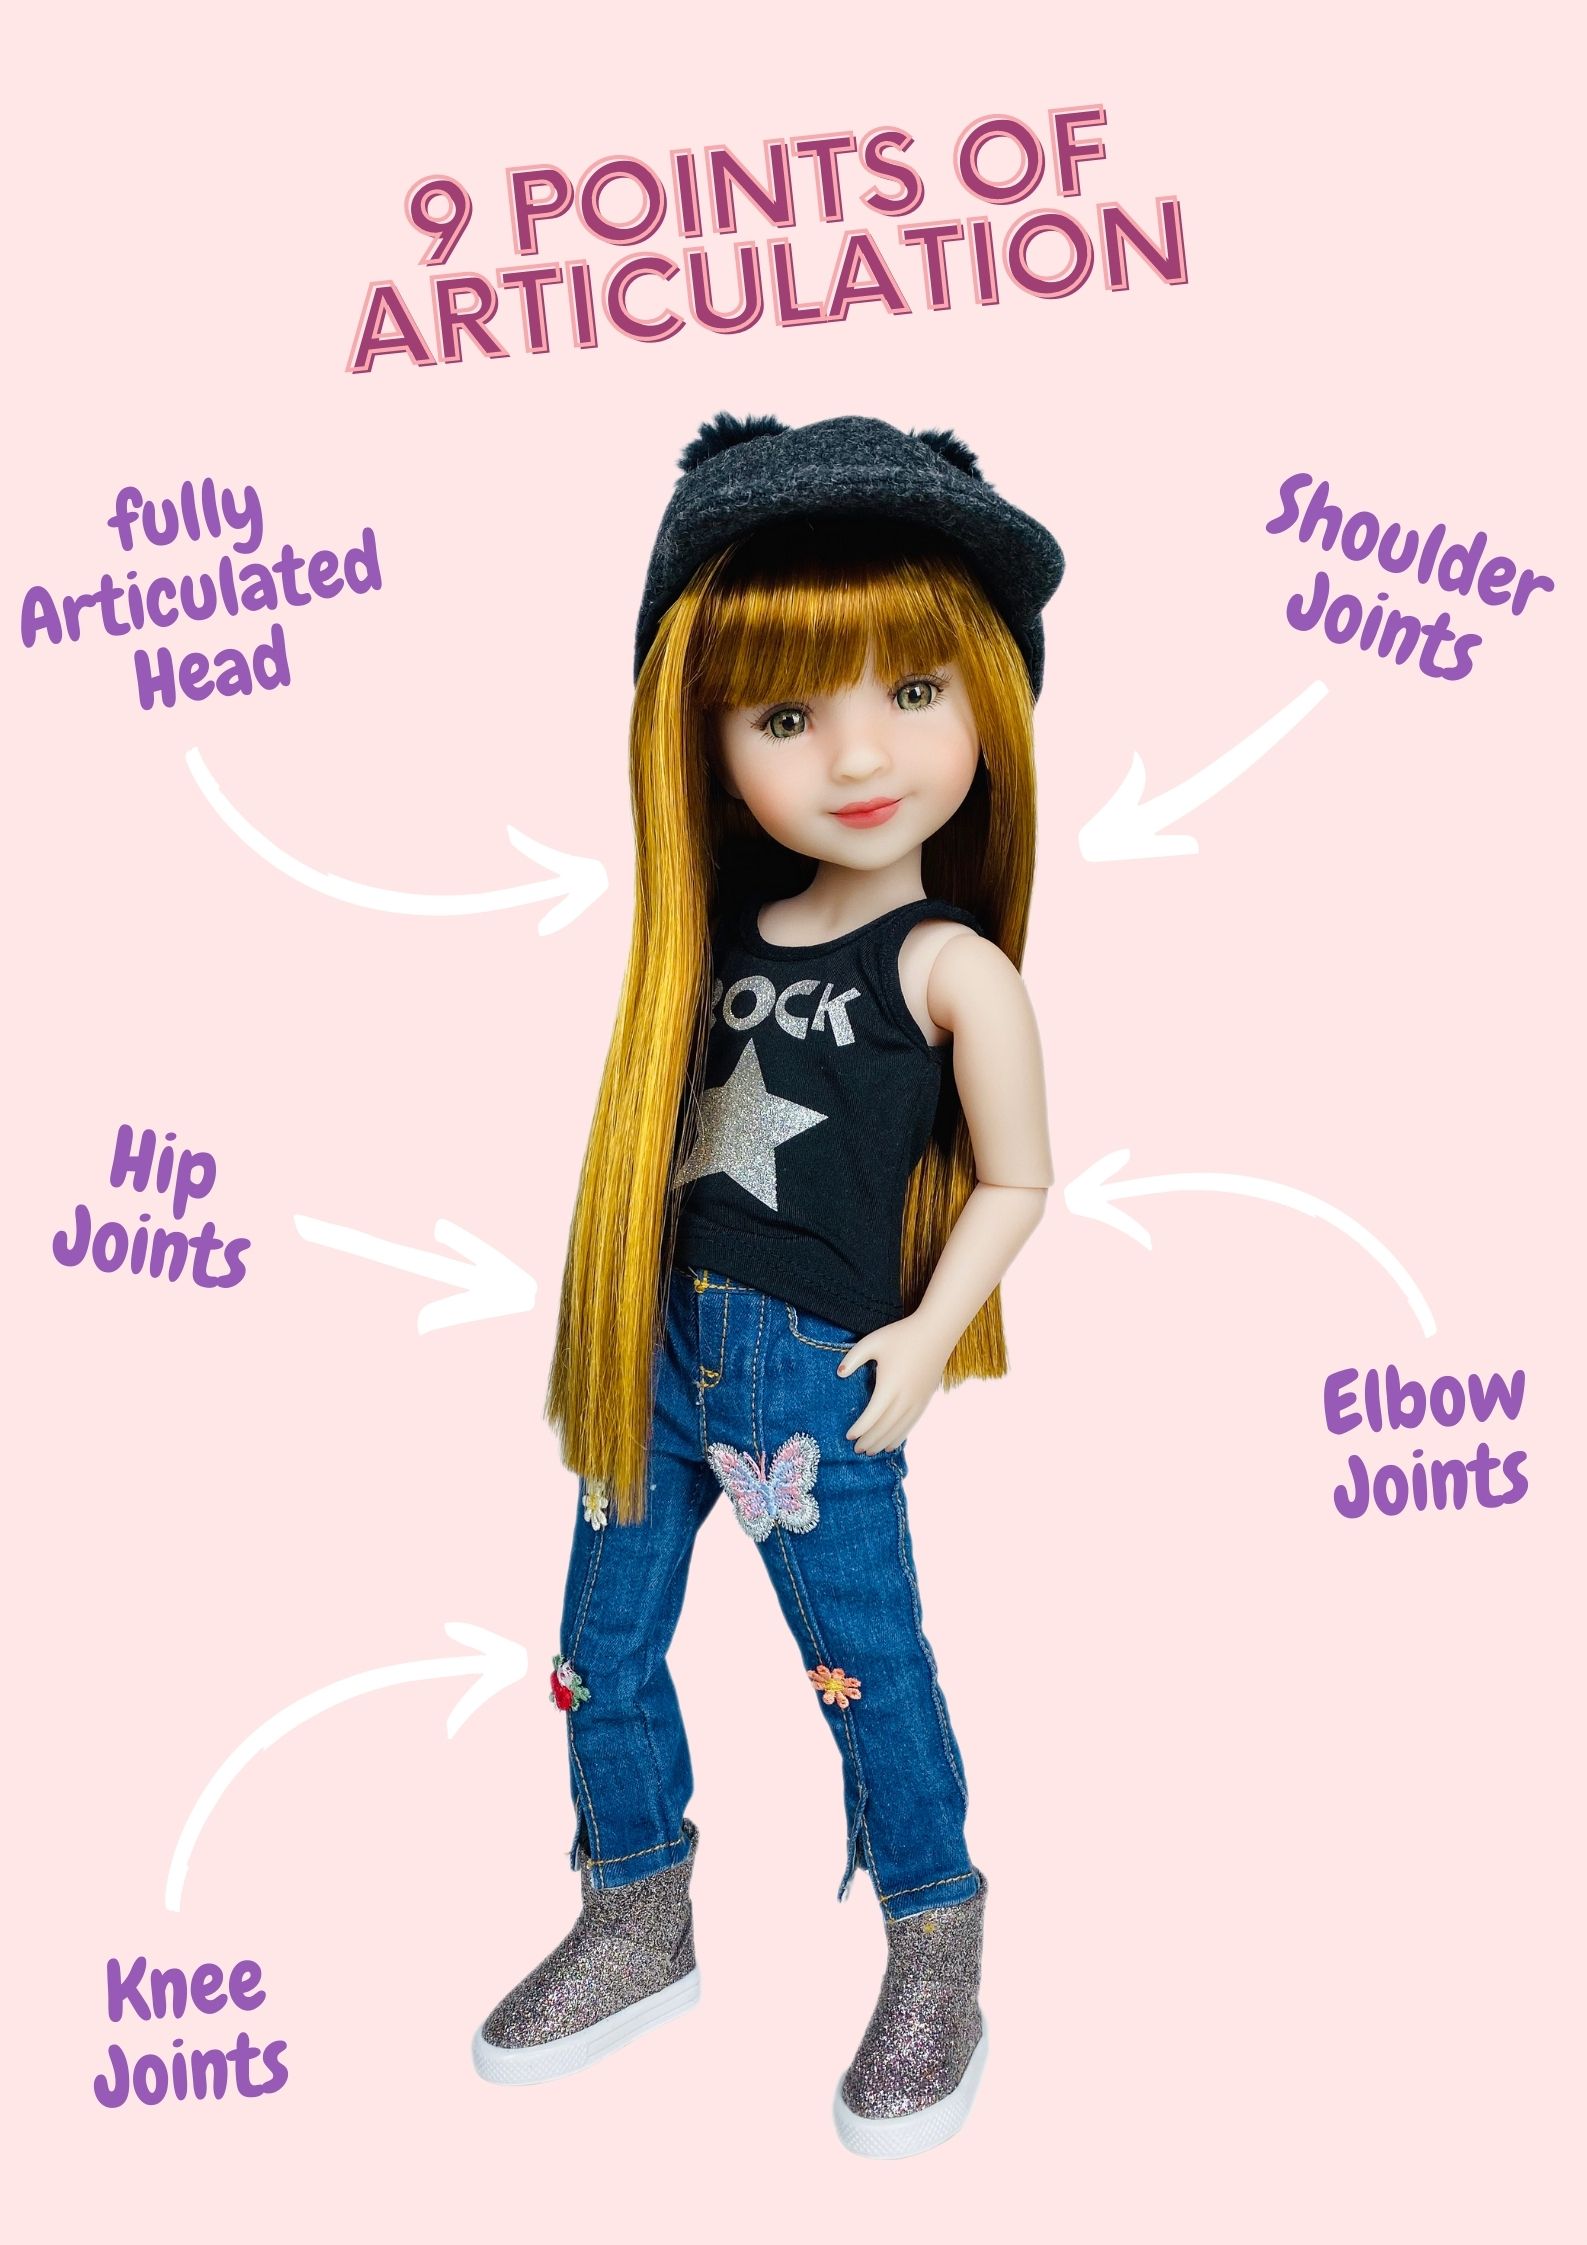 Articulated Dolls with 9 Joints